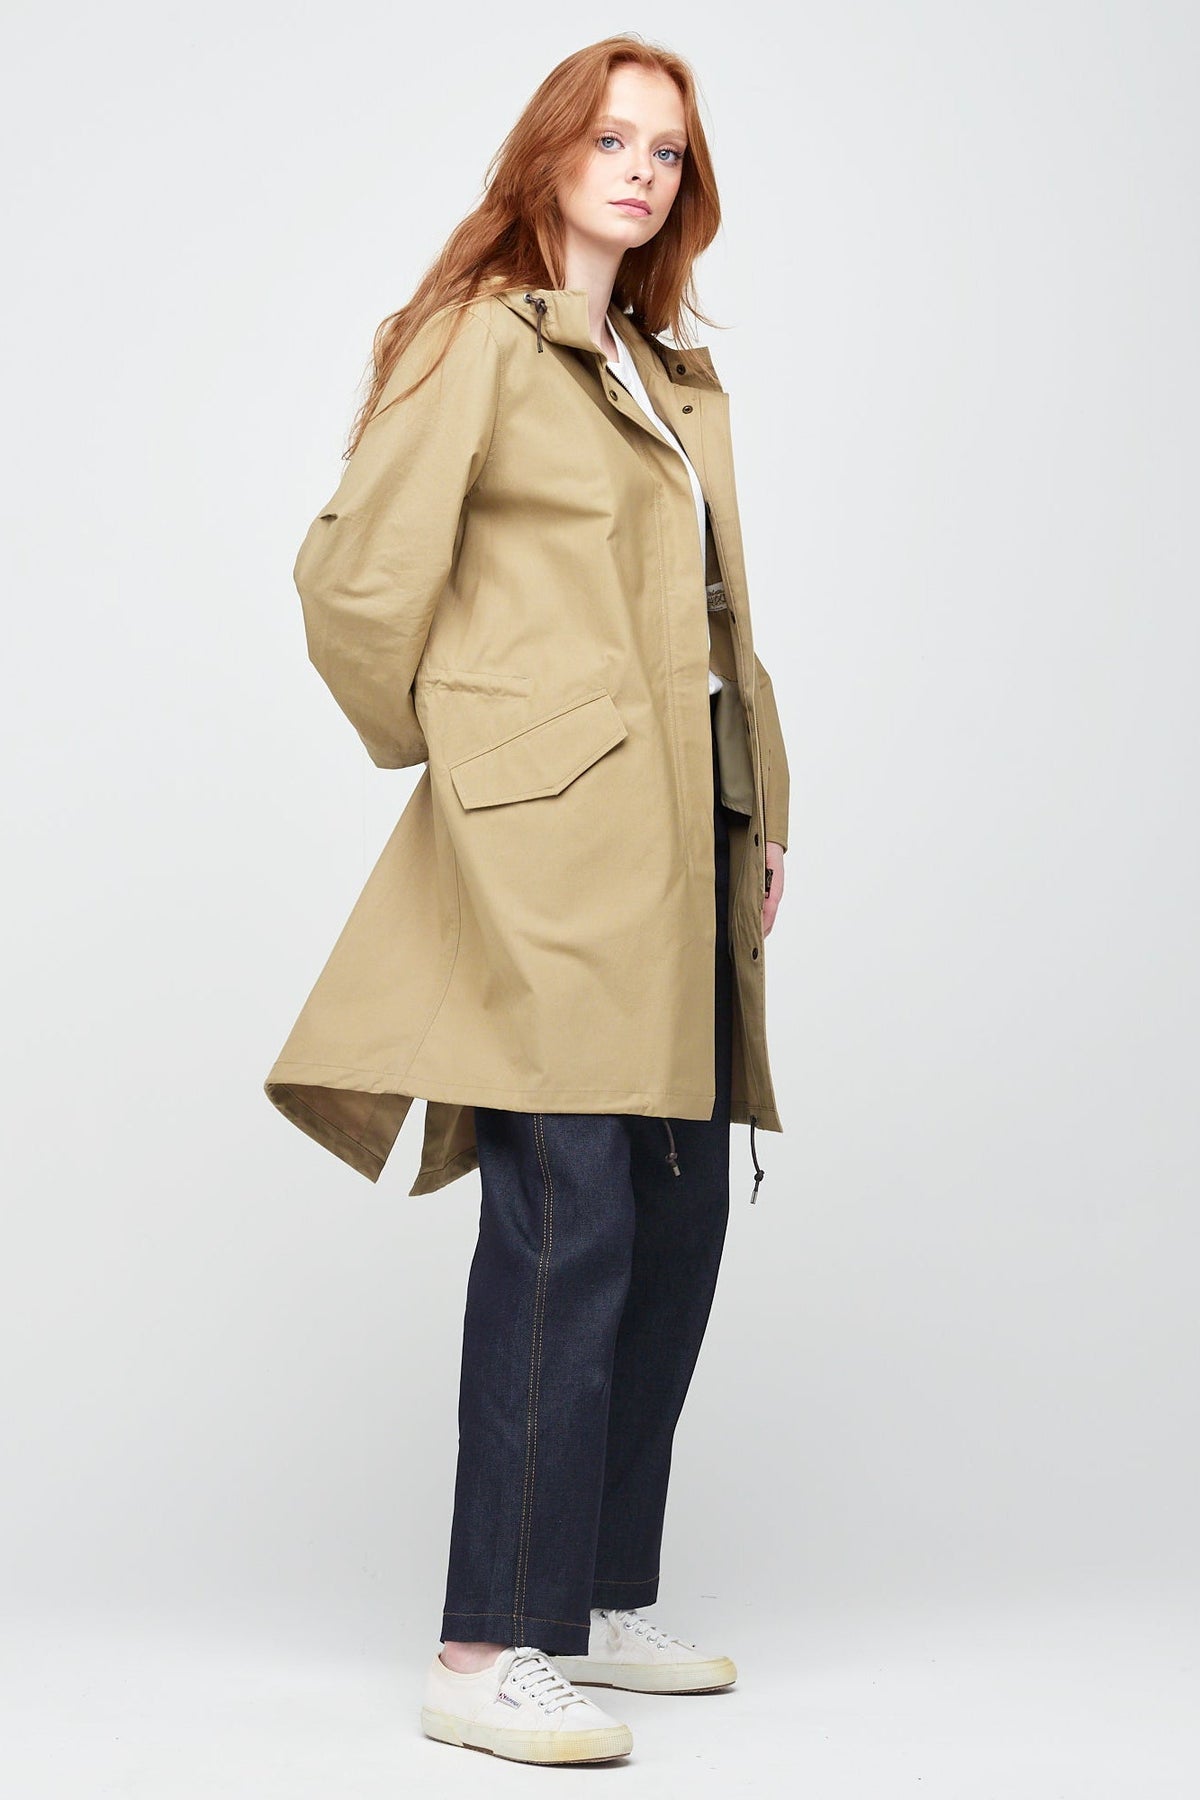 
            Side shot of a young, white female model with ginger hair wearing long stone coloured parka. The parka is styled with indigo jeans and a white trainer.